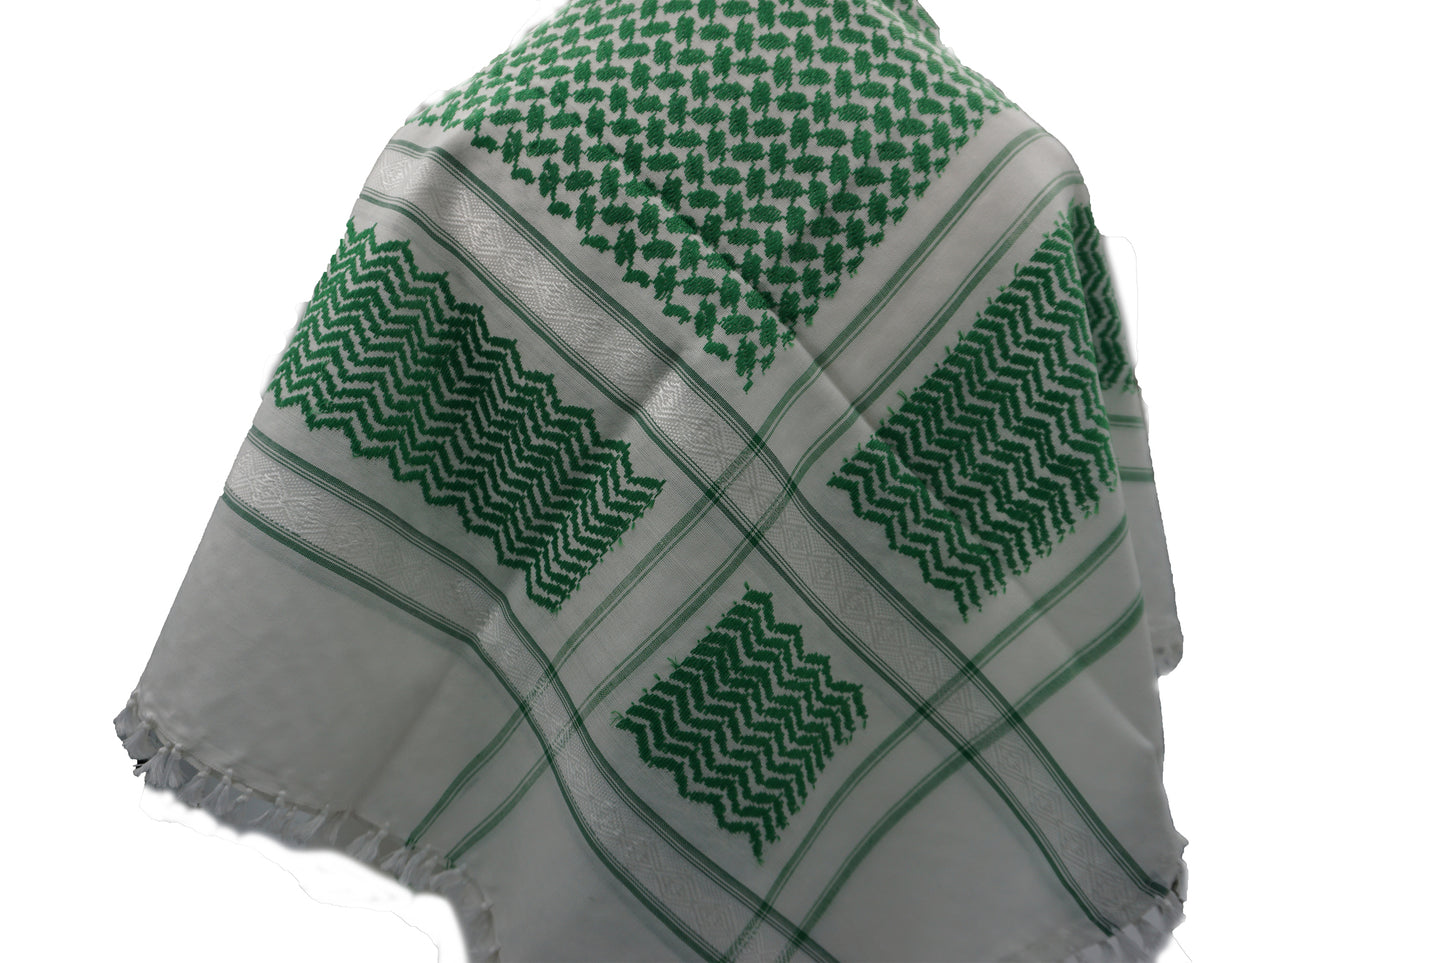 Arab 100% Soft Cotton Shemagh Scarf ( 3 colours) - Full Set 10 Pieces